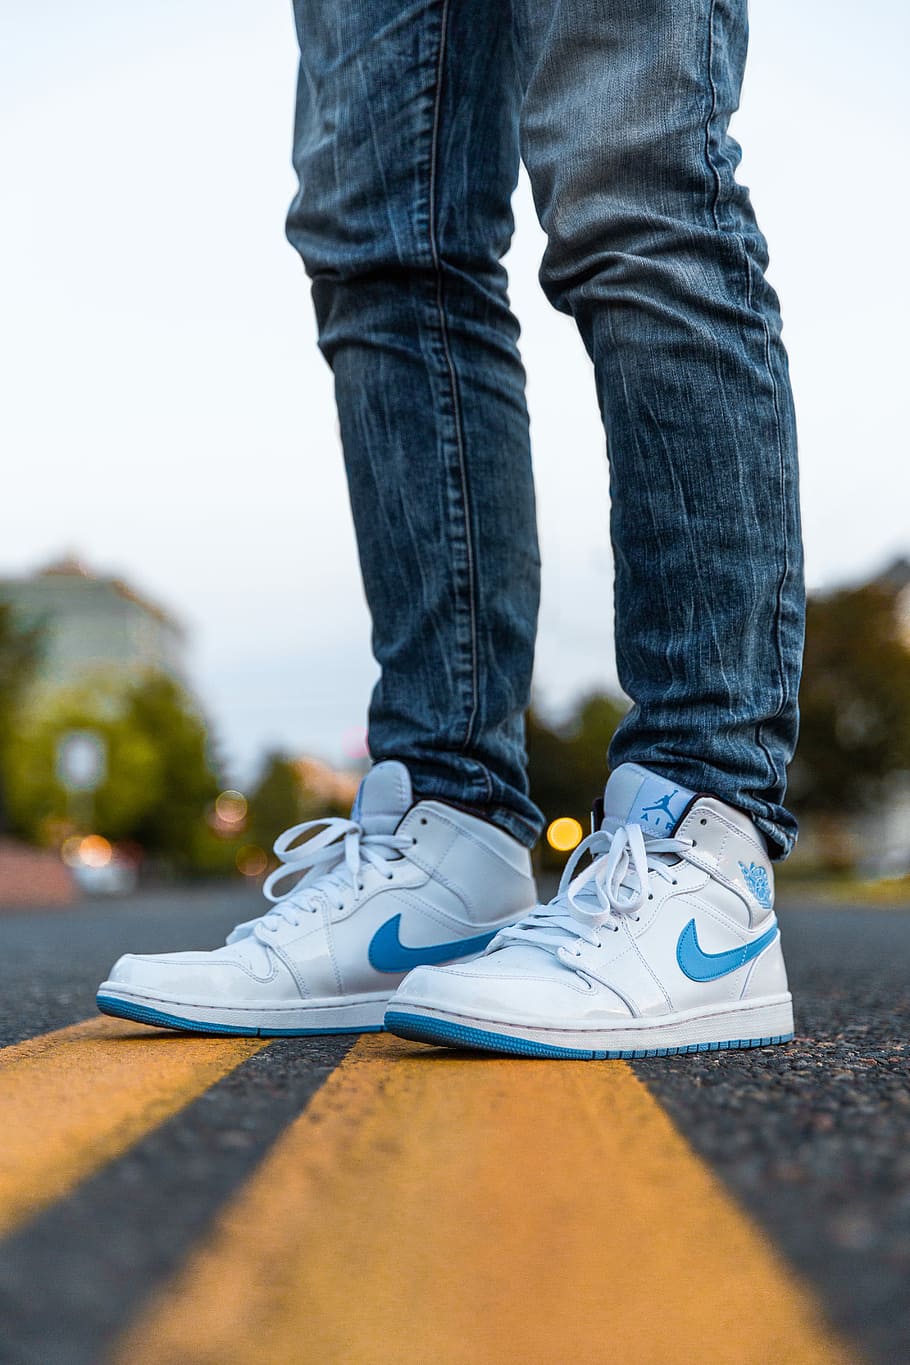 air jordan 1 mid with jeans